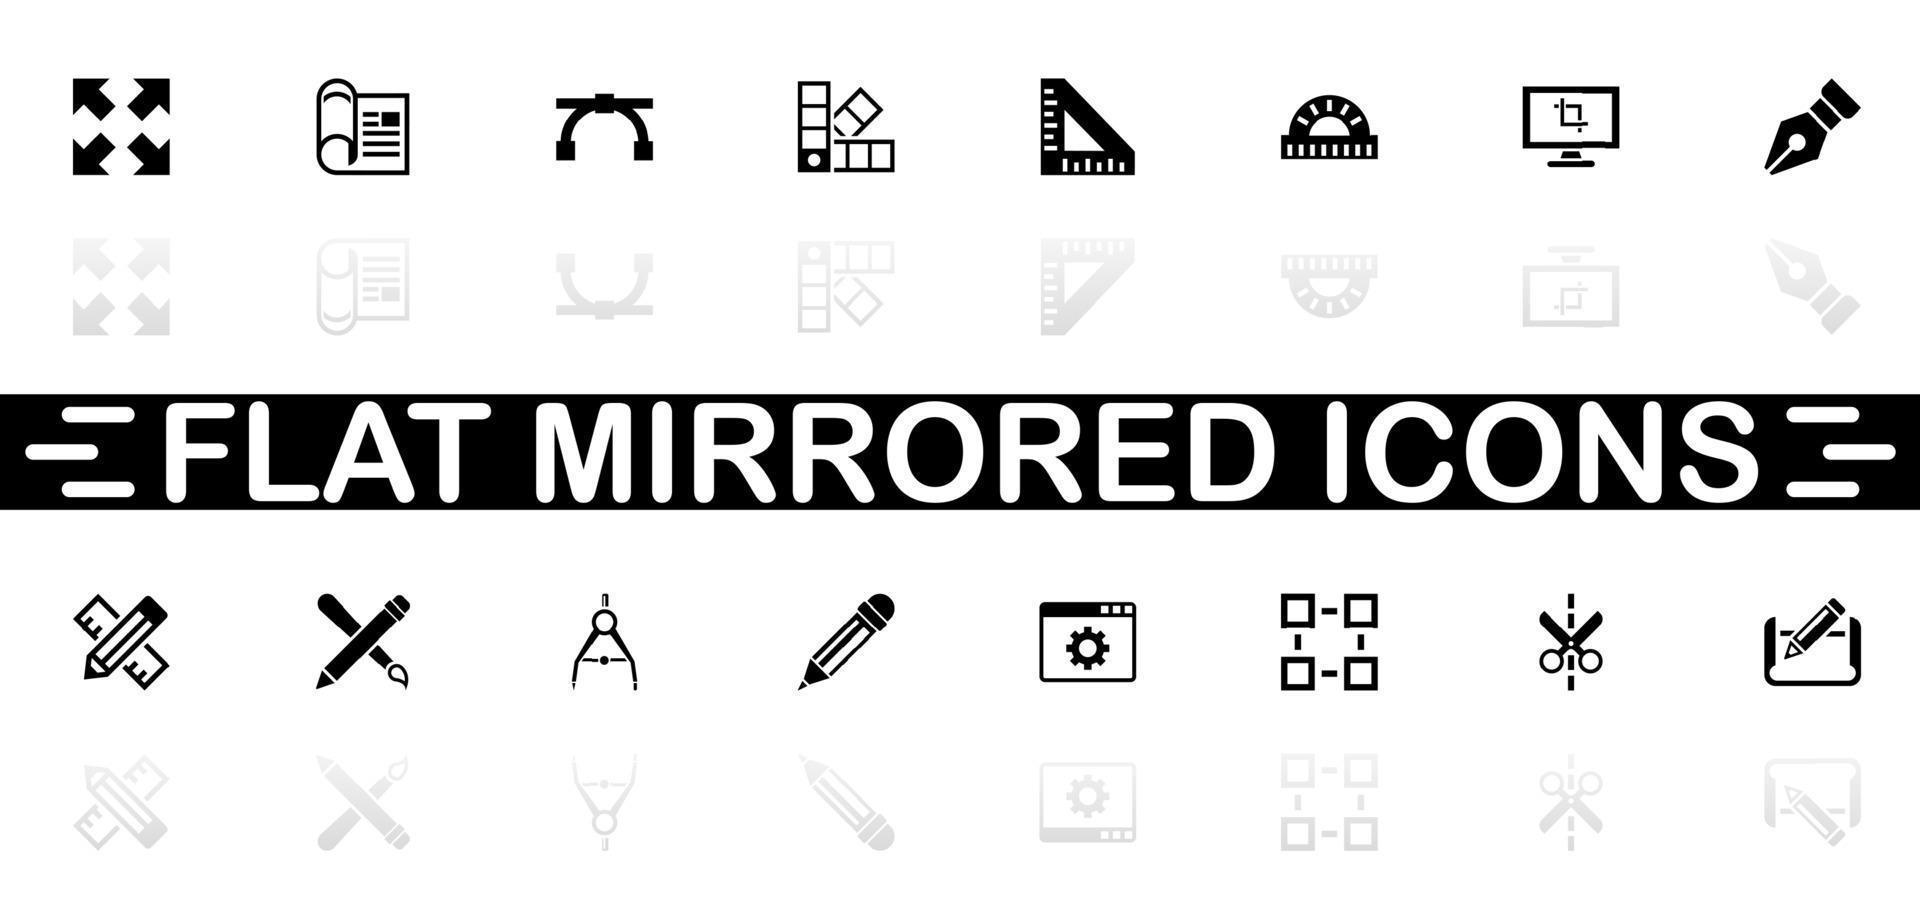 Blueprint icons - Black symbol on white background. Simple illustration. Flat Vector Icon. Mirror Reflection Shadow. Can be used in logo, web, mobile and UI UX project.